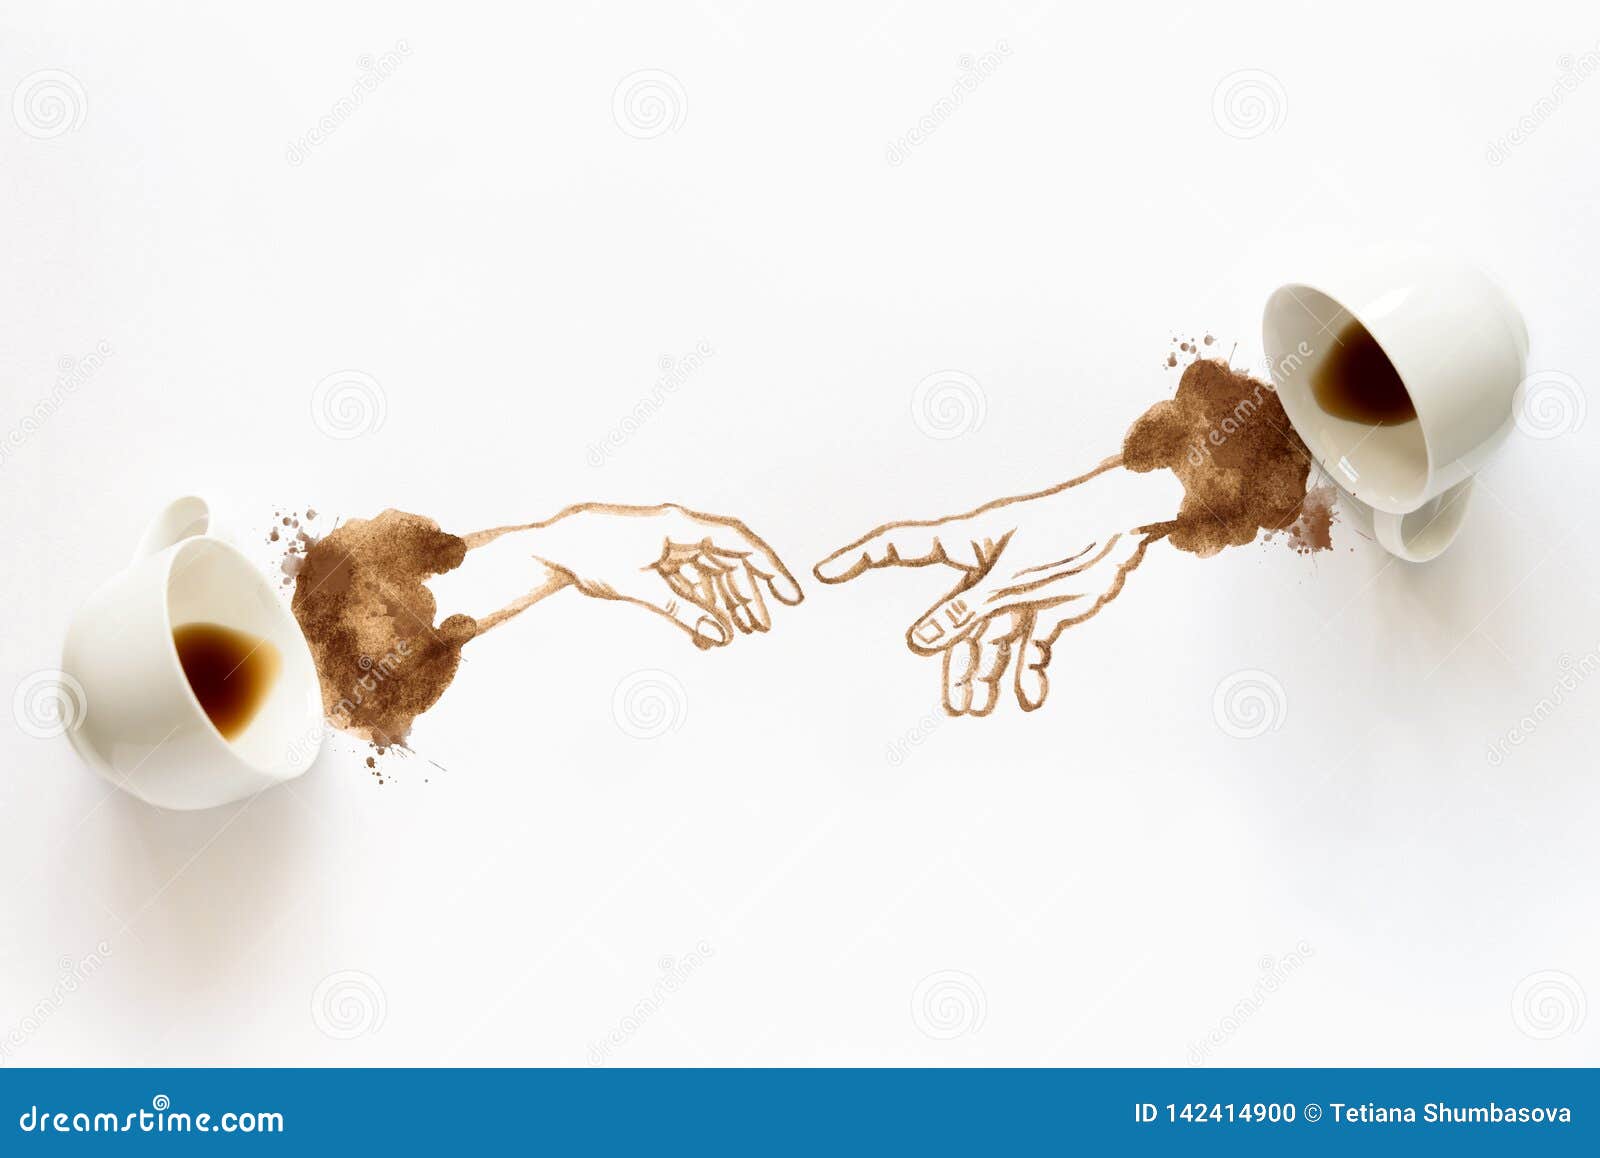 https://thumbs.dreamstime.com/z/two-espresso-cups-hand-drawing-hand-to-hand-halping-hands-coffee-art-creative-concept-top-view-two-espresso-cups-hand-142414900.jpg